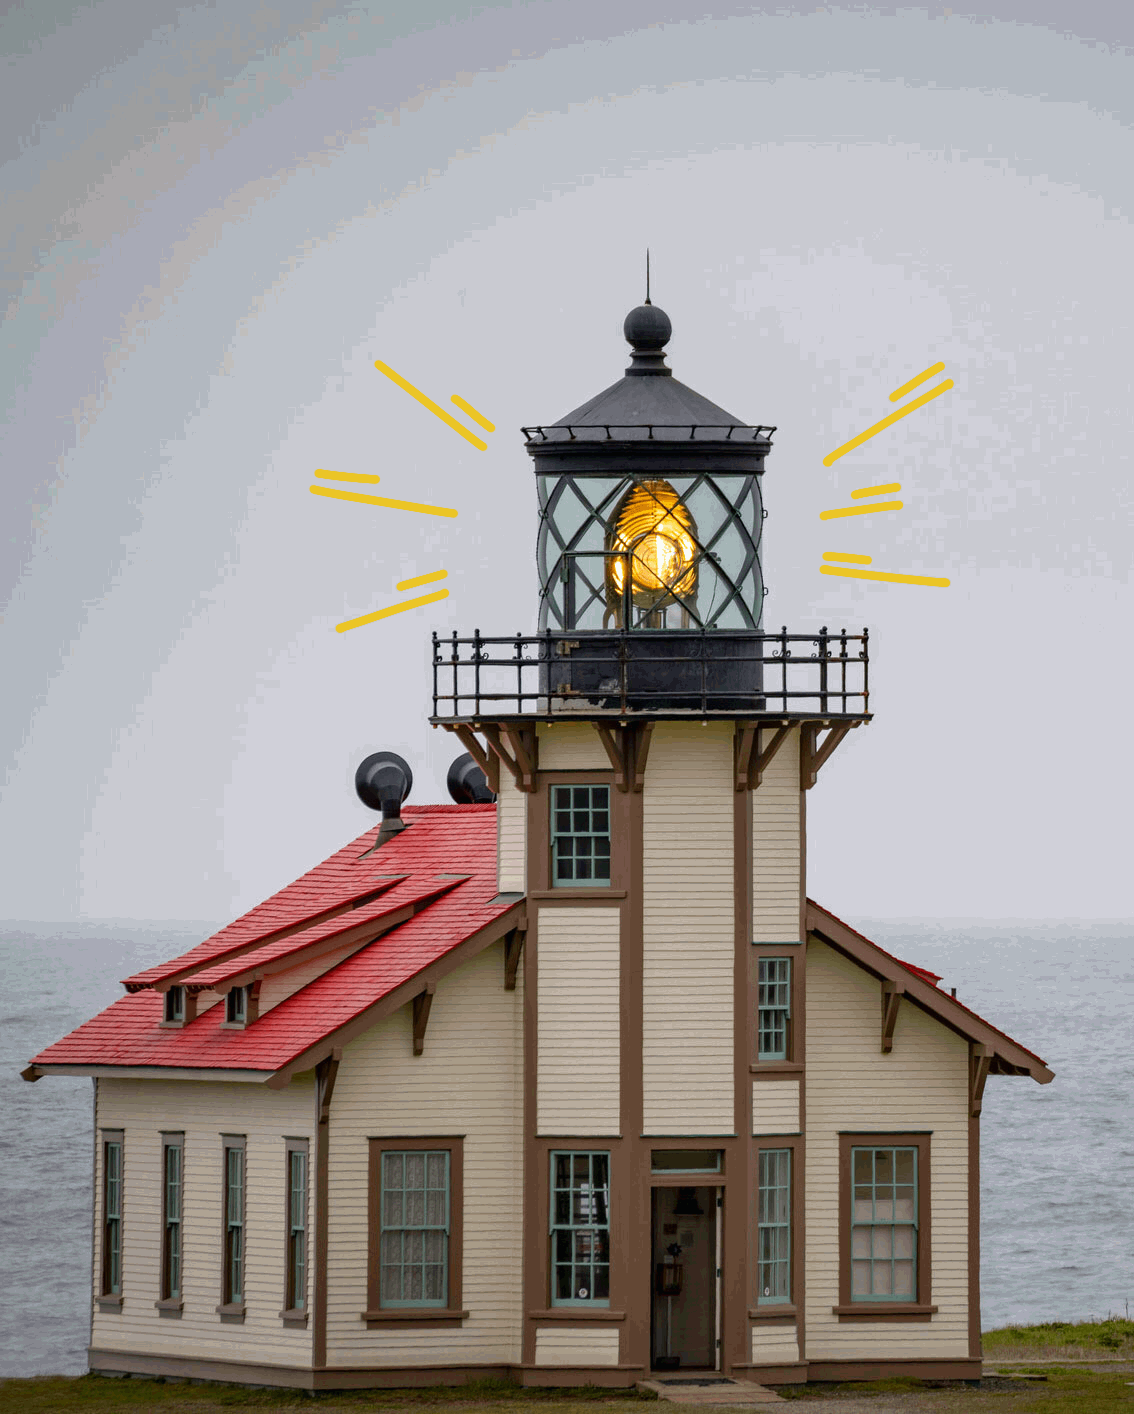 A light station with animated rays beaming from the light in the tower.